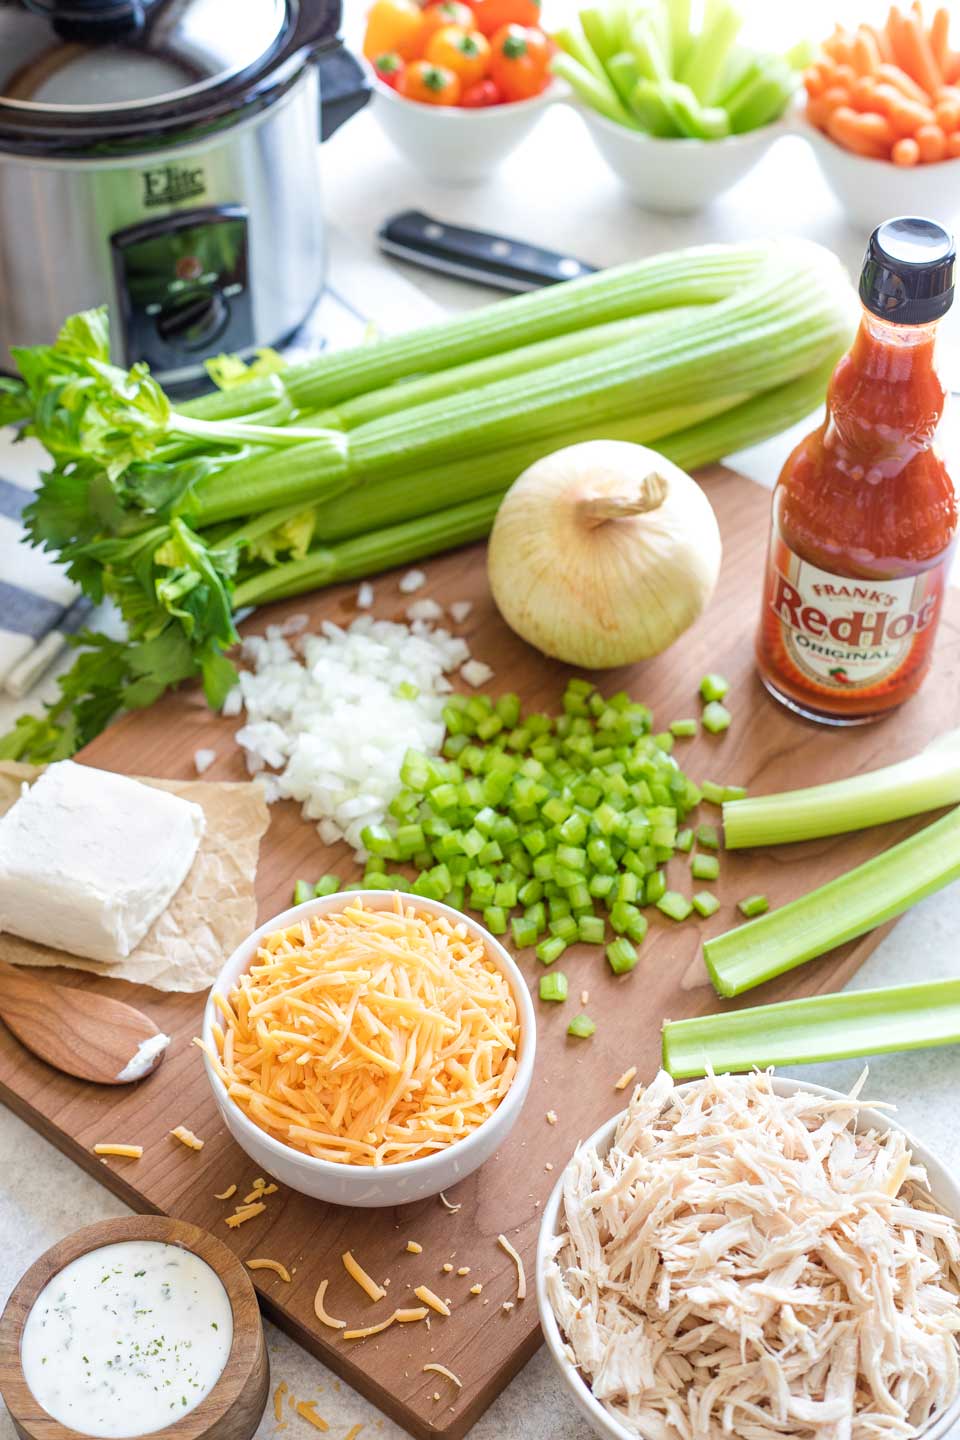 Ingredients like Frank's Red Hot Sauce and chopped vegetables on a wooden cutting board near empty crockpot.